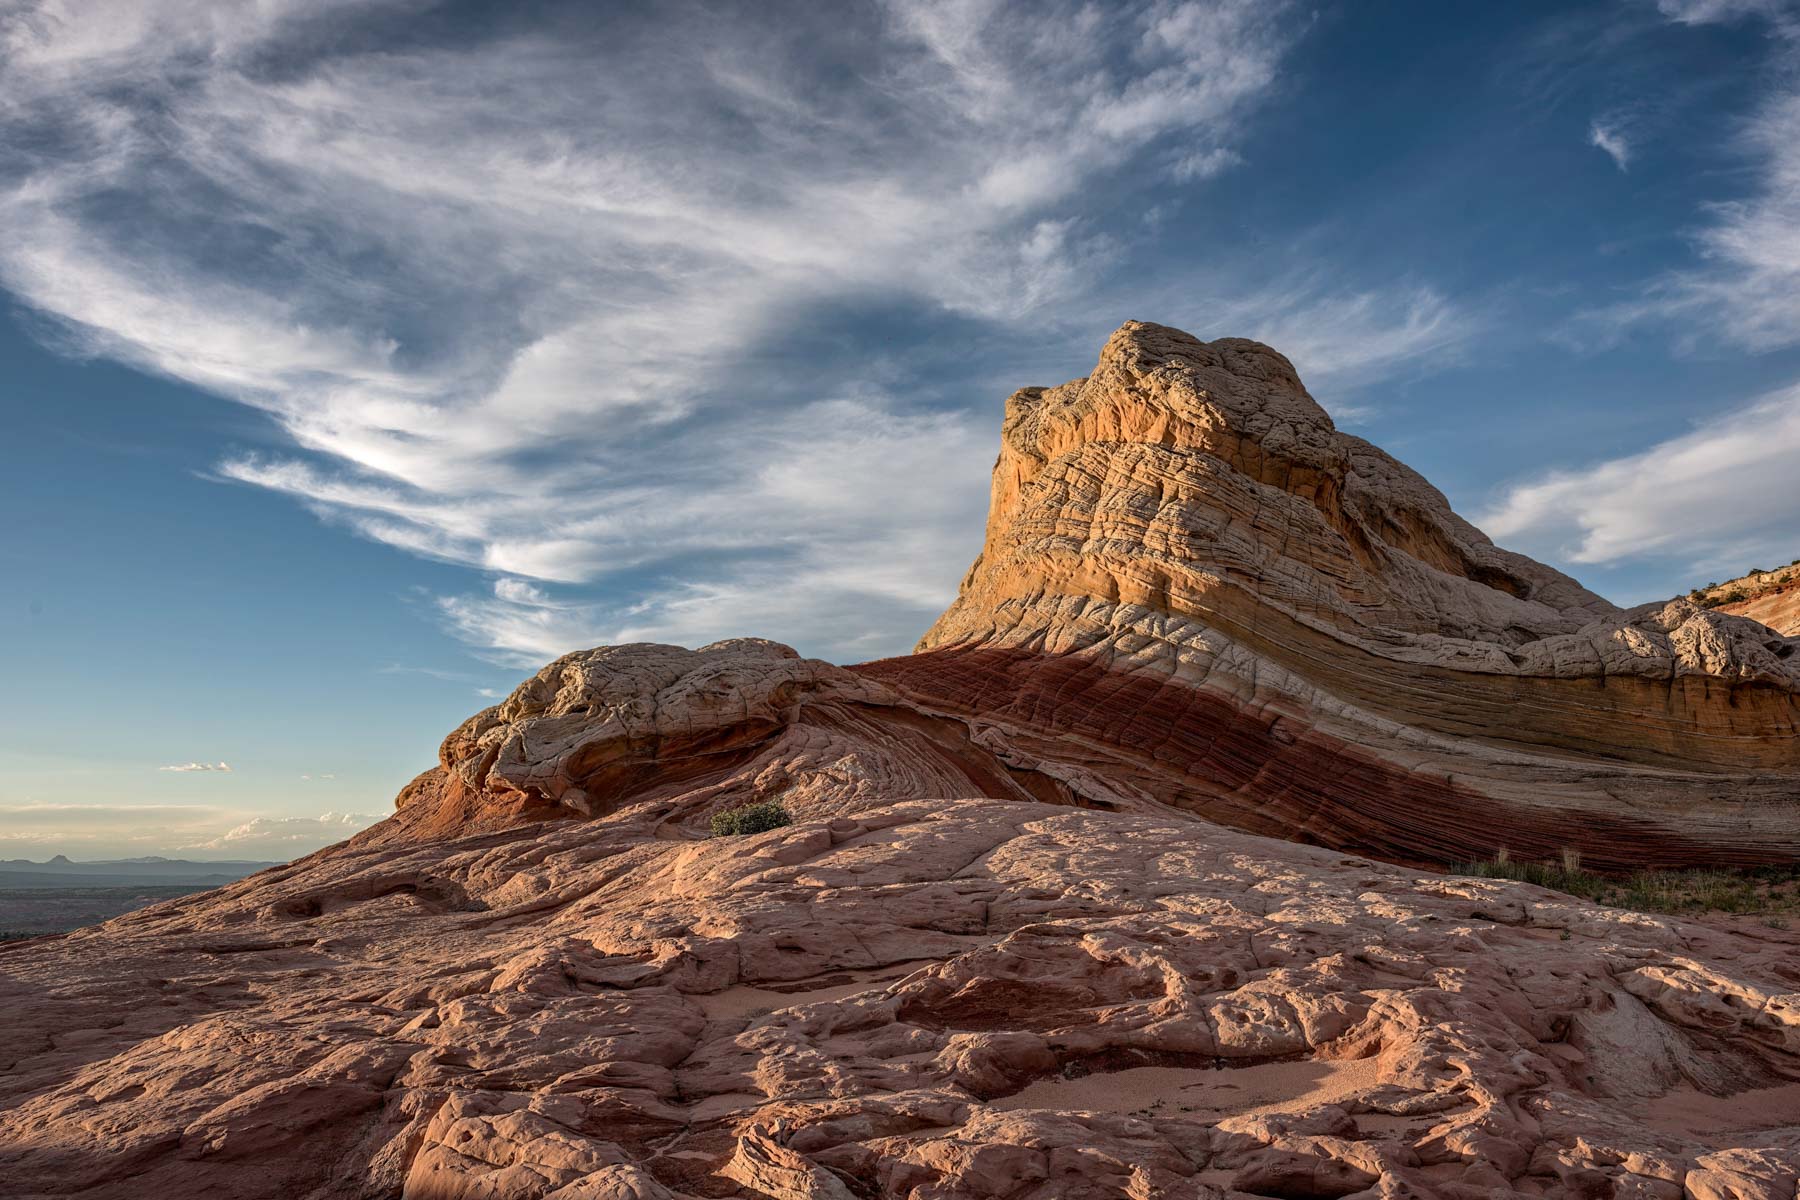 The Swirl Rock formation at The White Pocket in Vermilion Cliffs National Monument